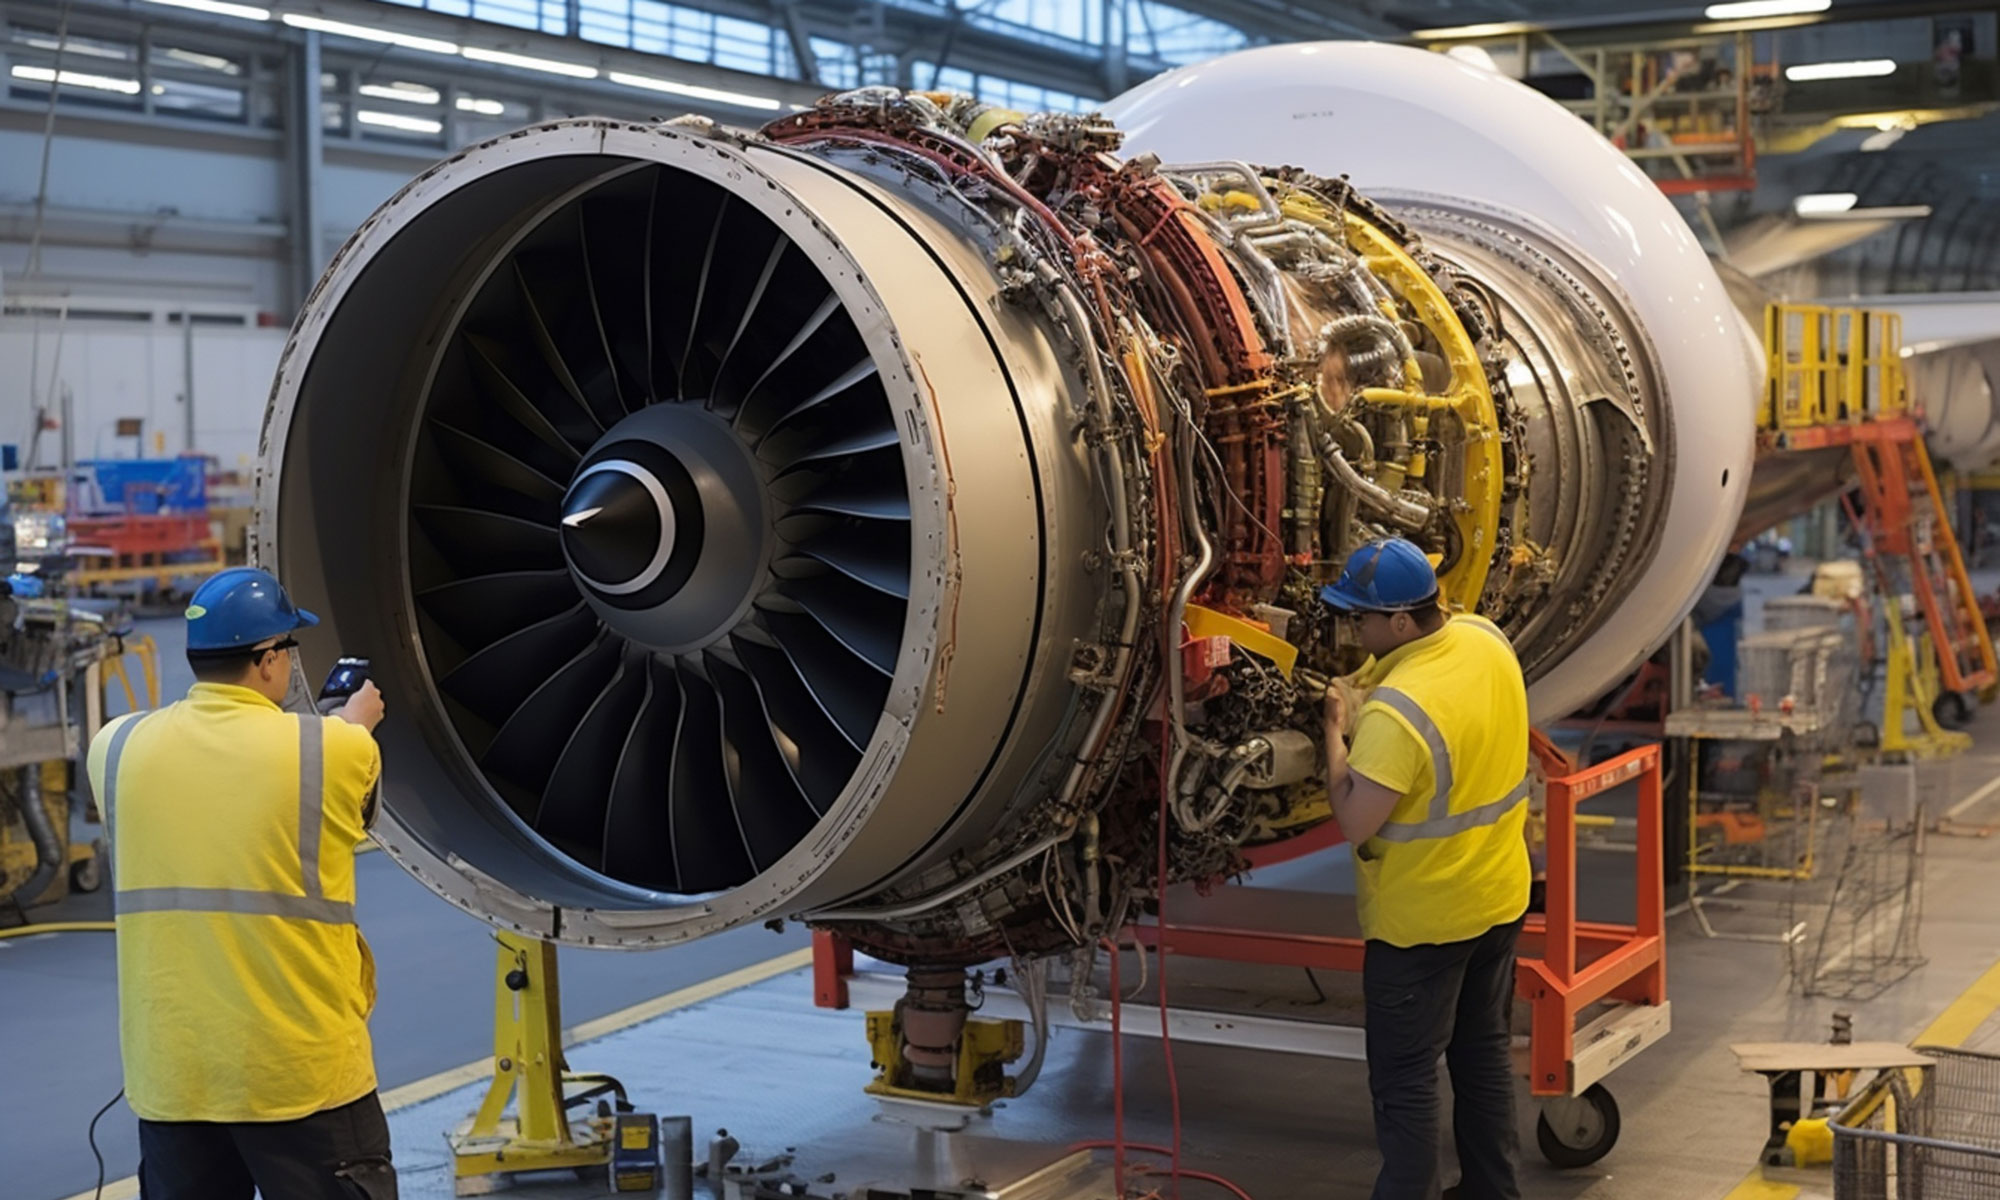 Two men working on an aircraft turbine engine